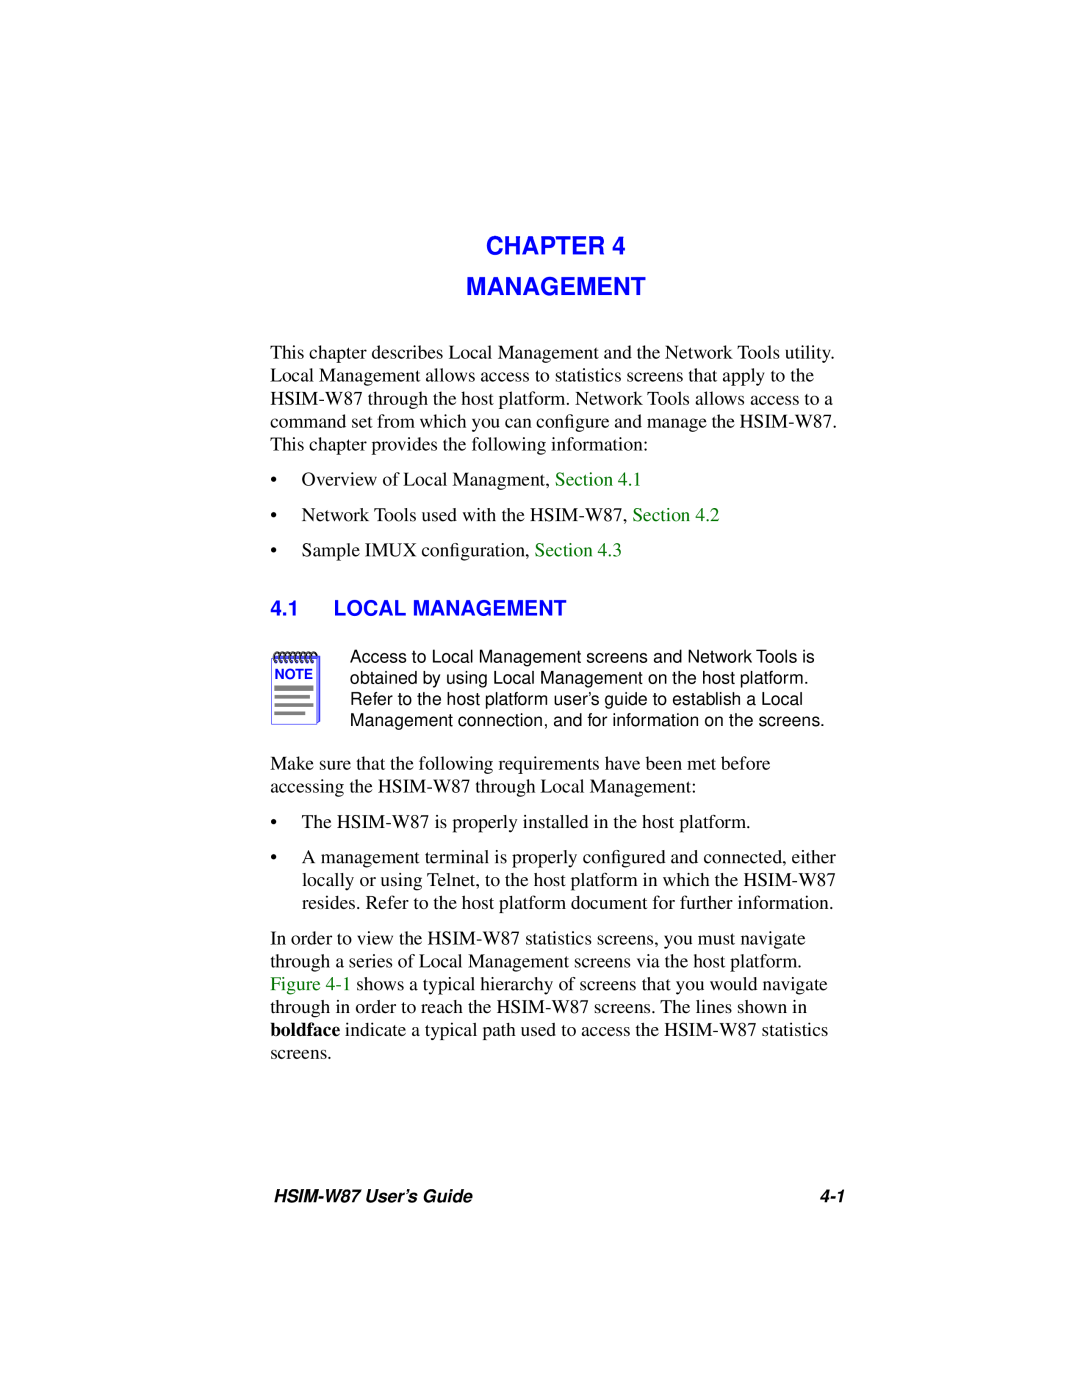 Cabletron Systems HSIM-W87 manual Chapter Management, Local Management 